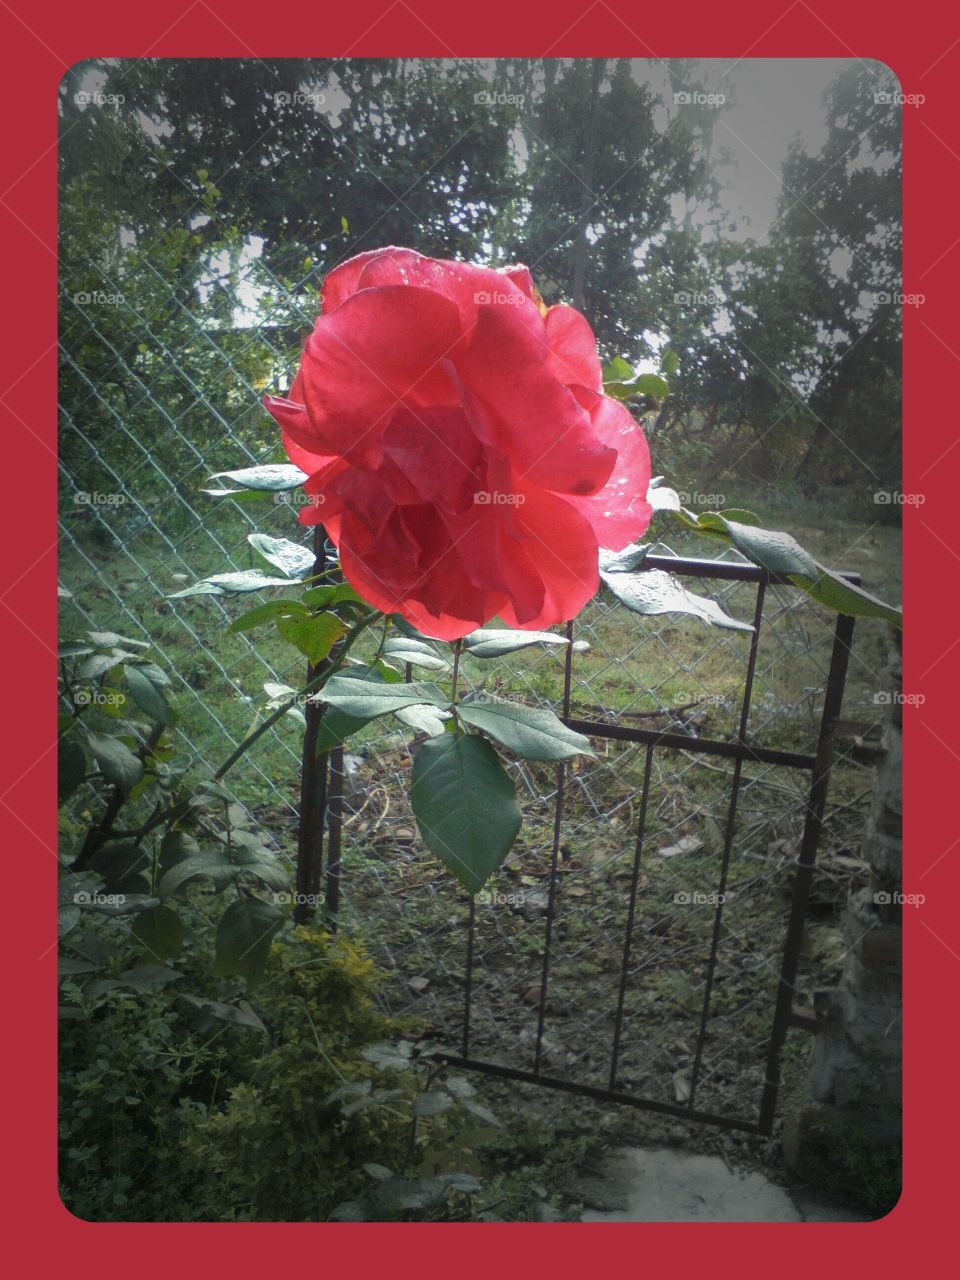 a red rose in back yard...